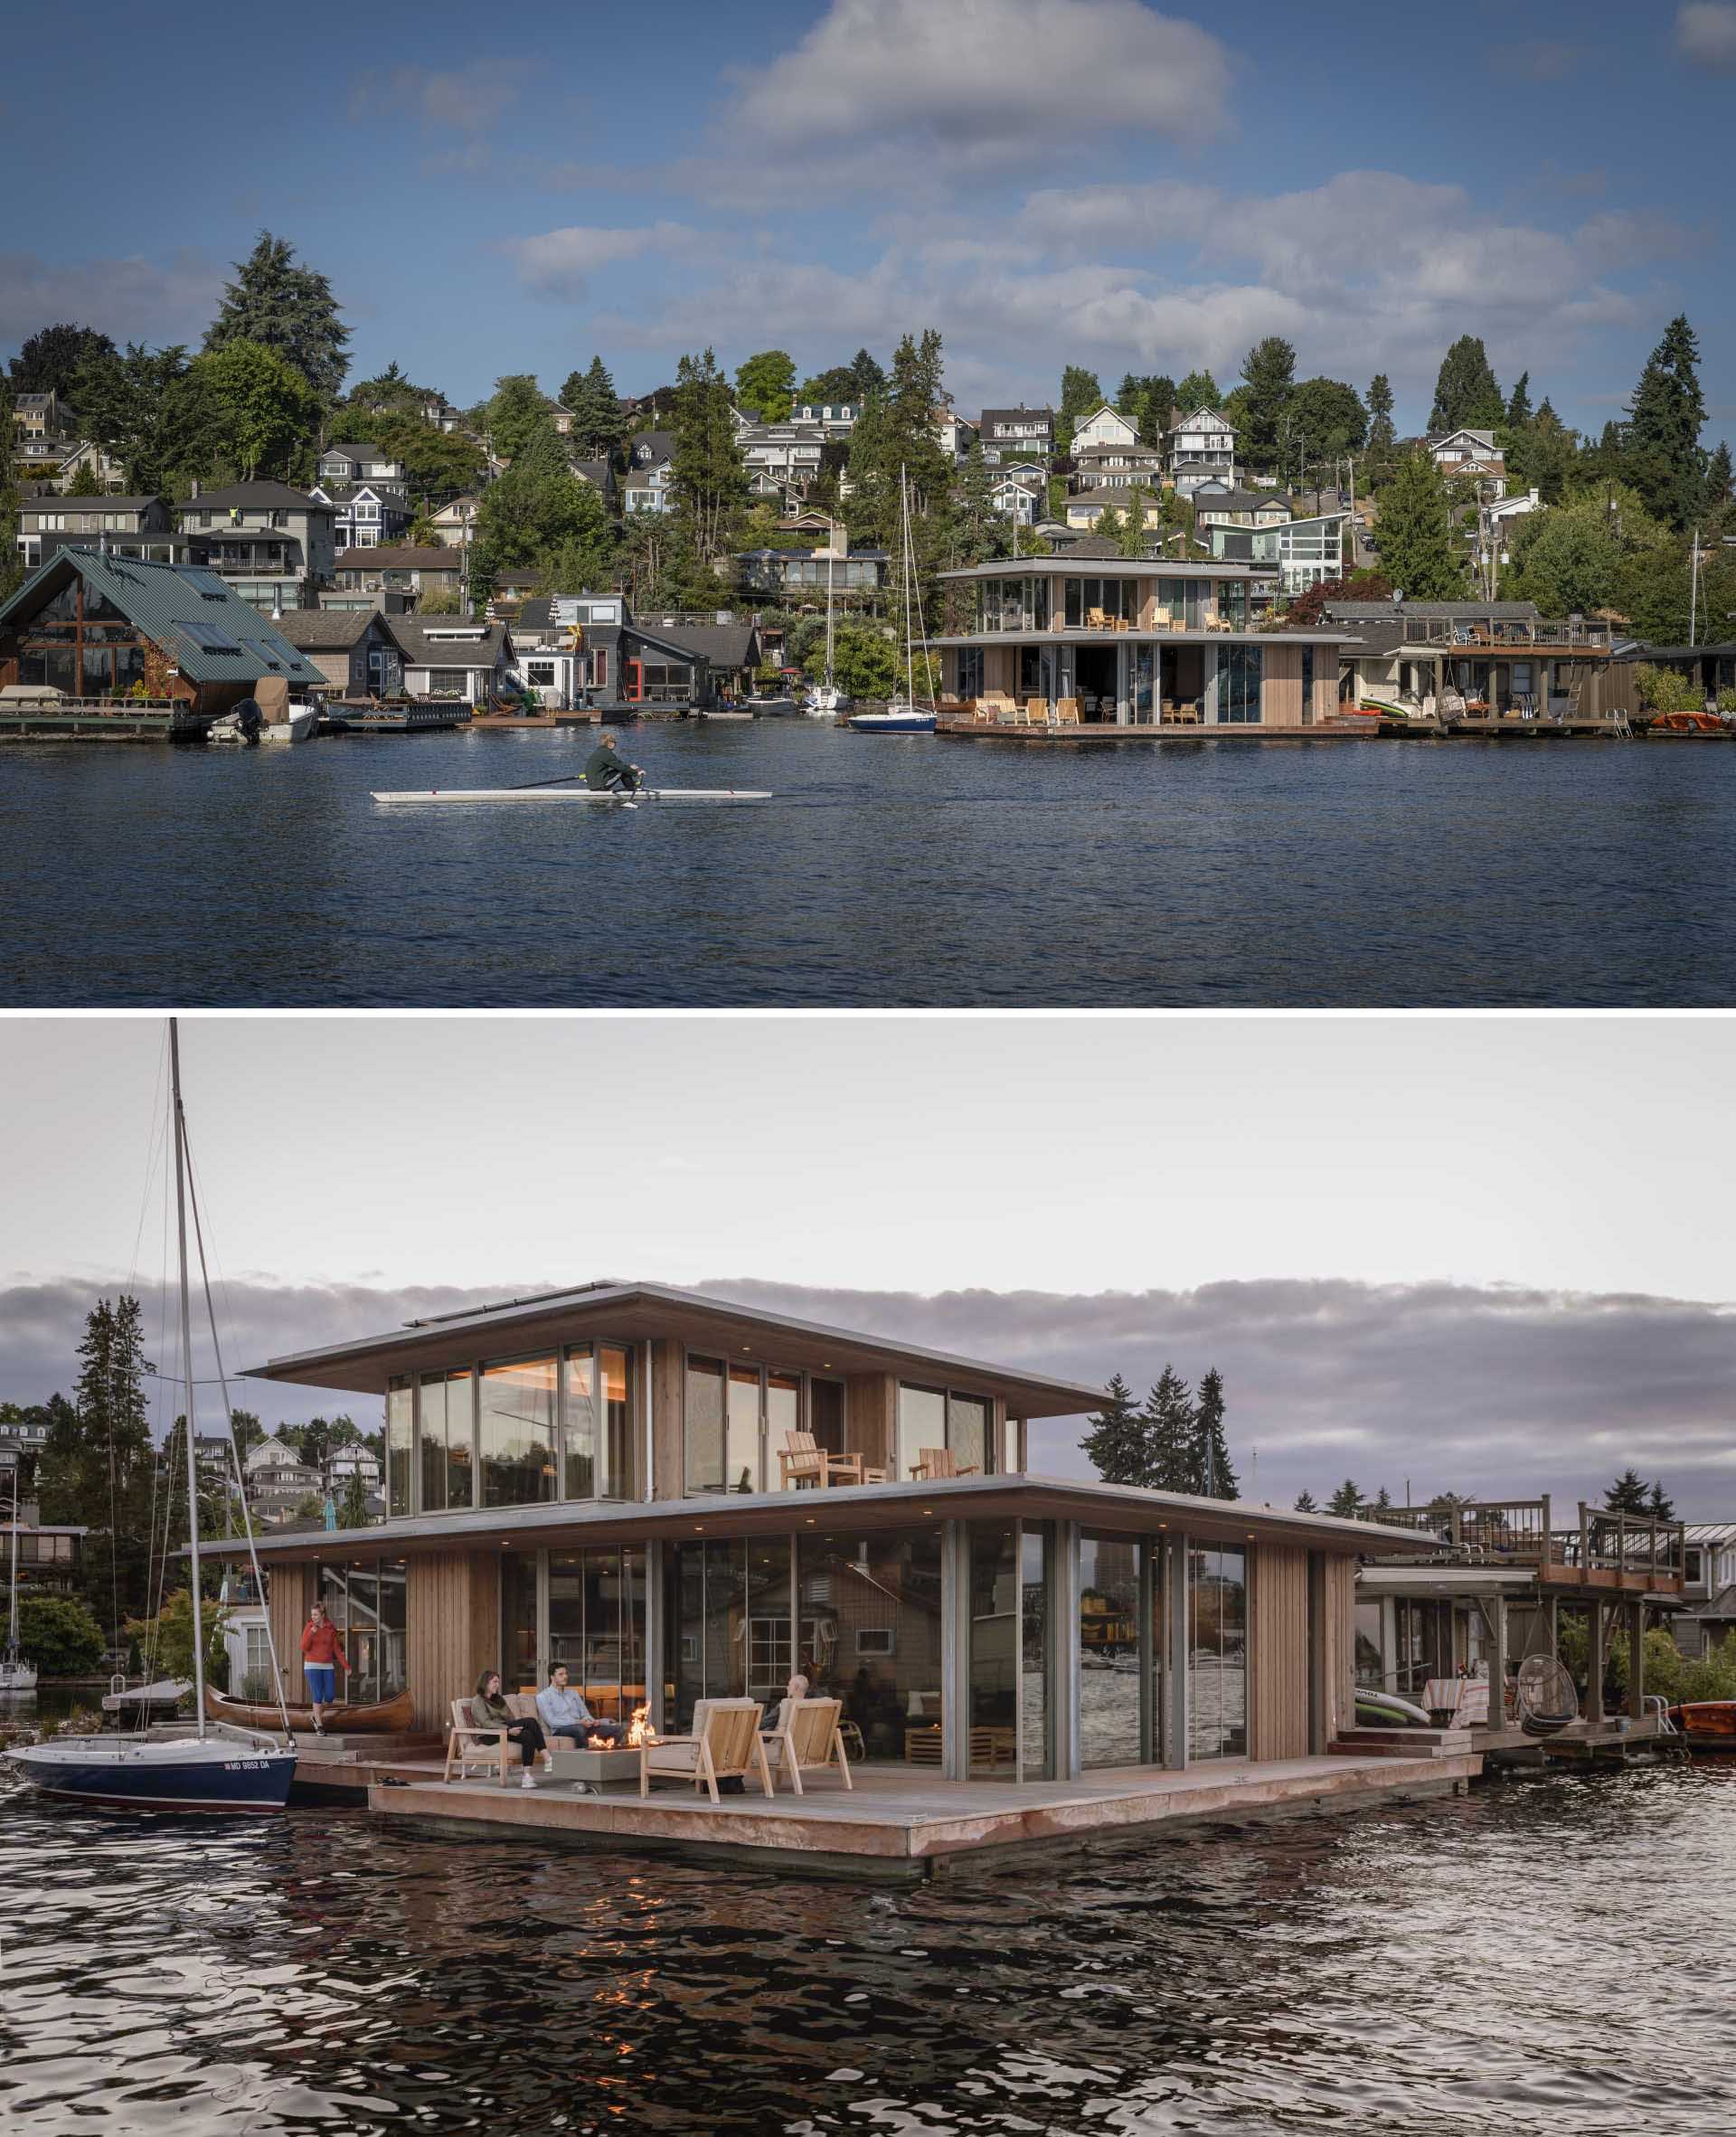 Architecture firm Olson Kundig, has designed a floating cabin in Seattle, Washington, that's part of a floating home community on Portage Bay.